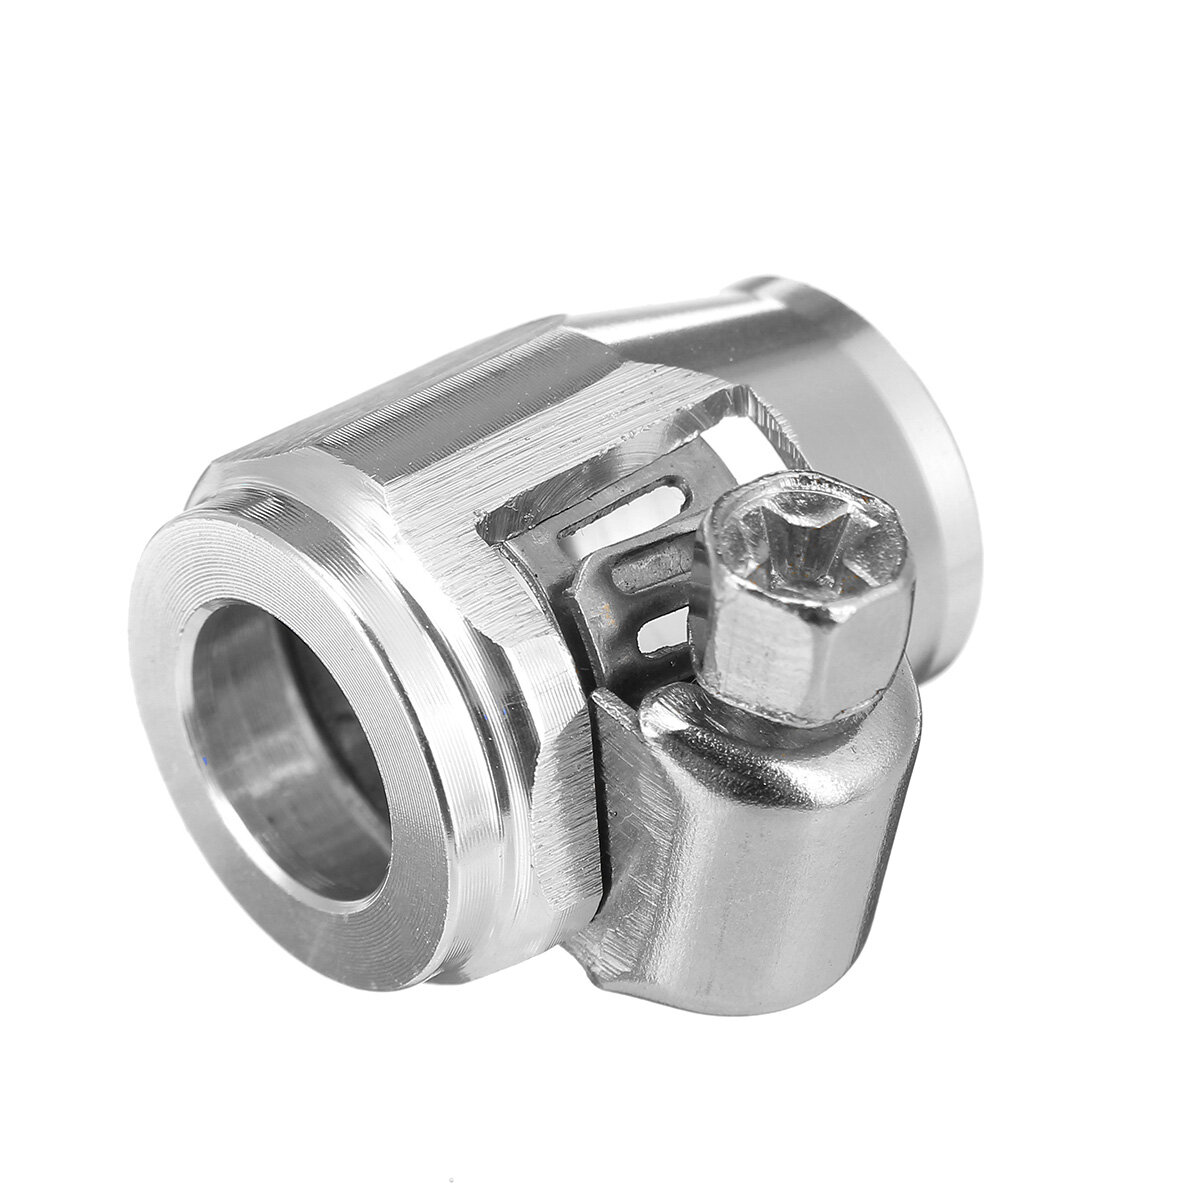 AN4 Hex Hose Finisher Clamp With Screw Band Hose End Cover Fitting Adapter Connector